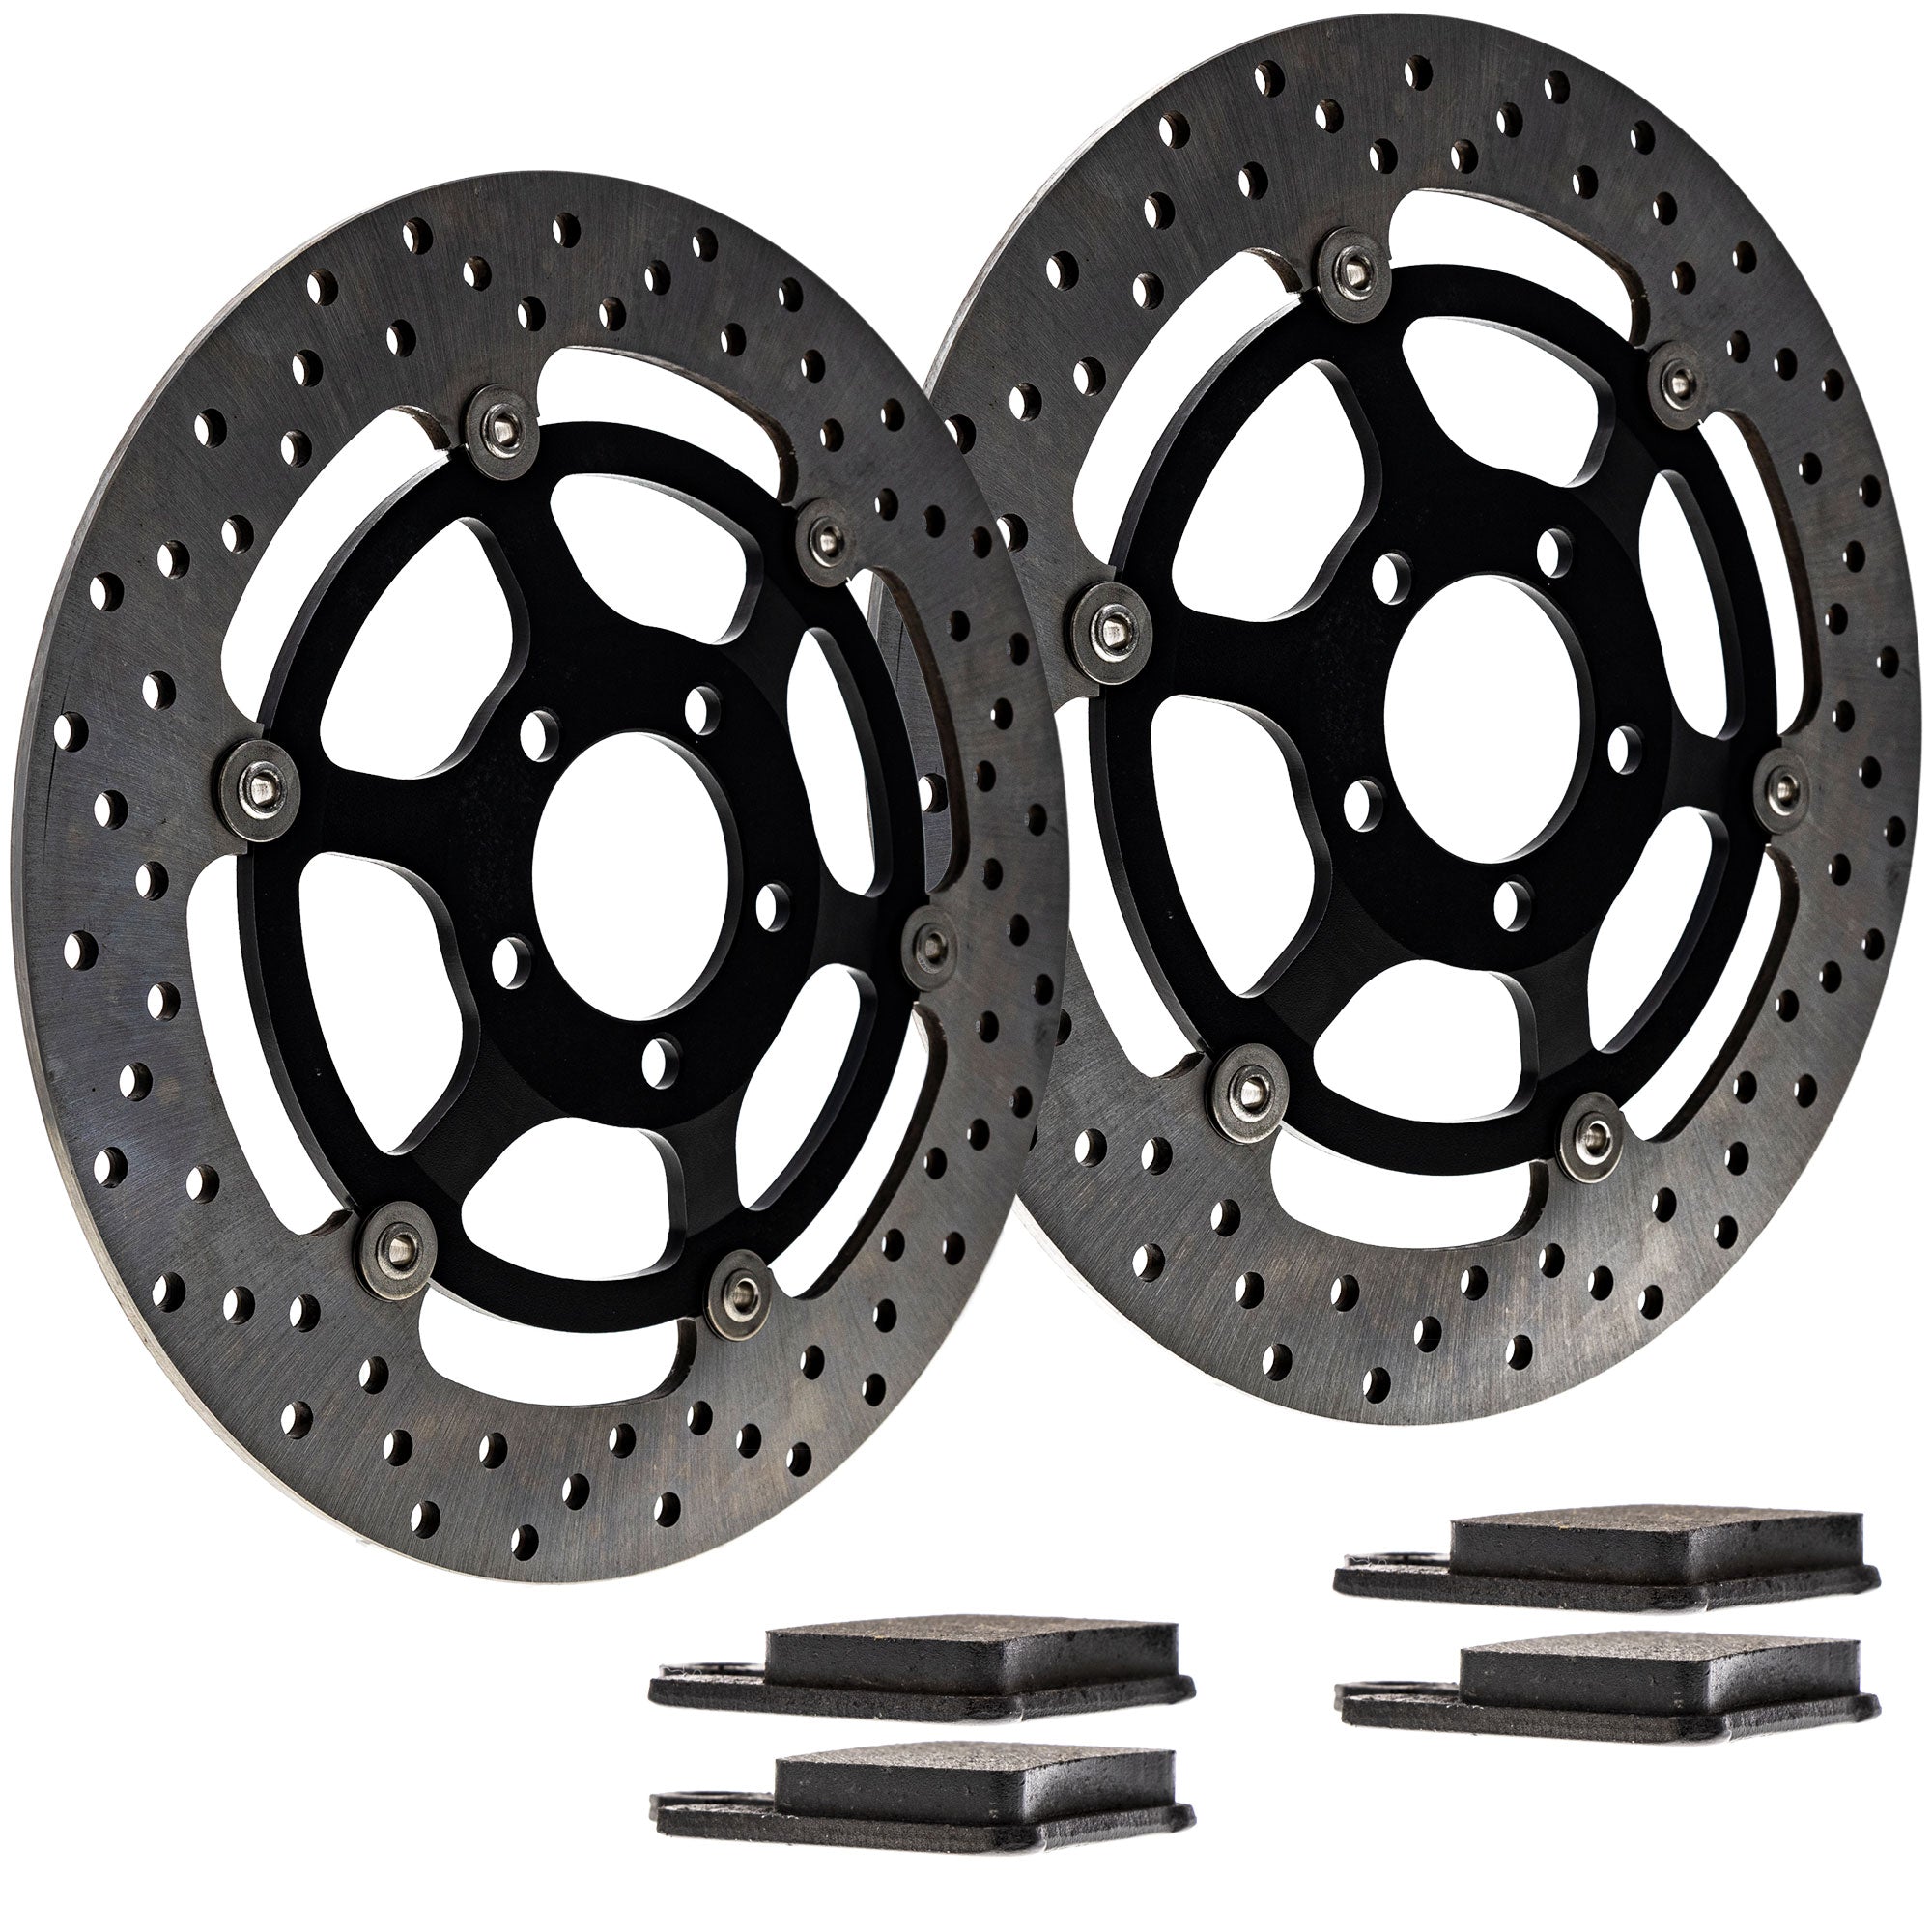 Complete Front or Rear Pad and Rotor Set for zOTHER Victory Honda Ninja 43082-1293 NICHE MK1006689